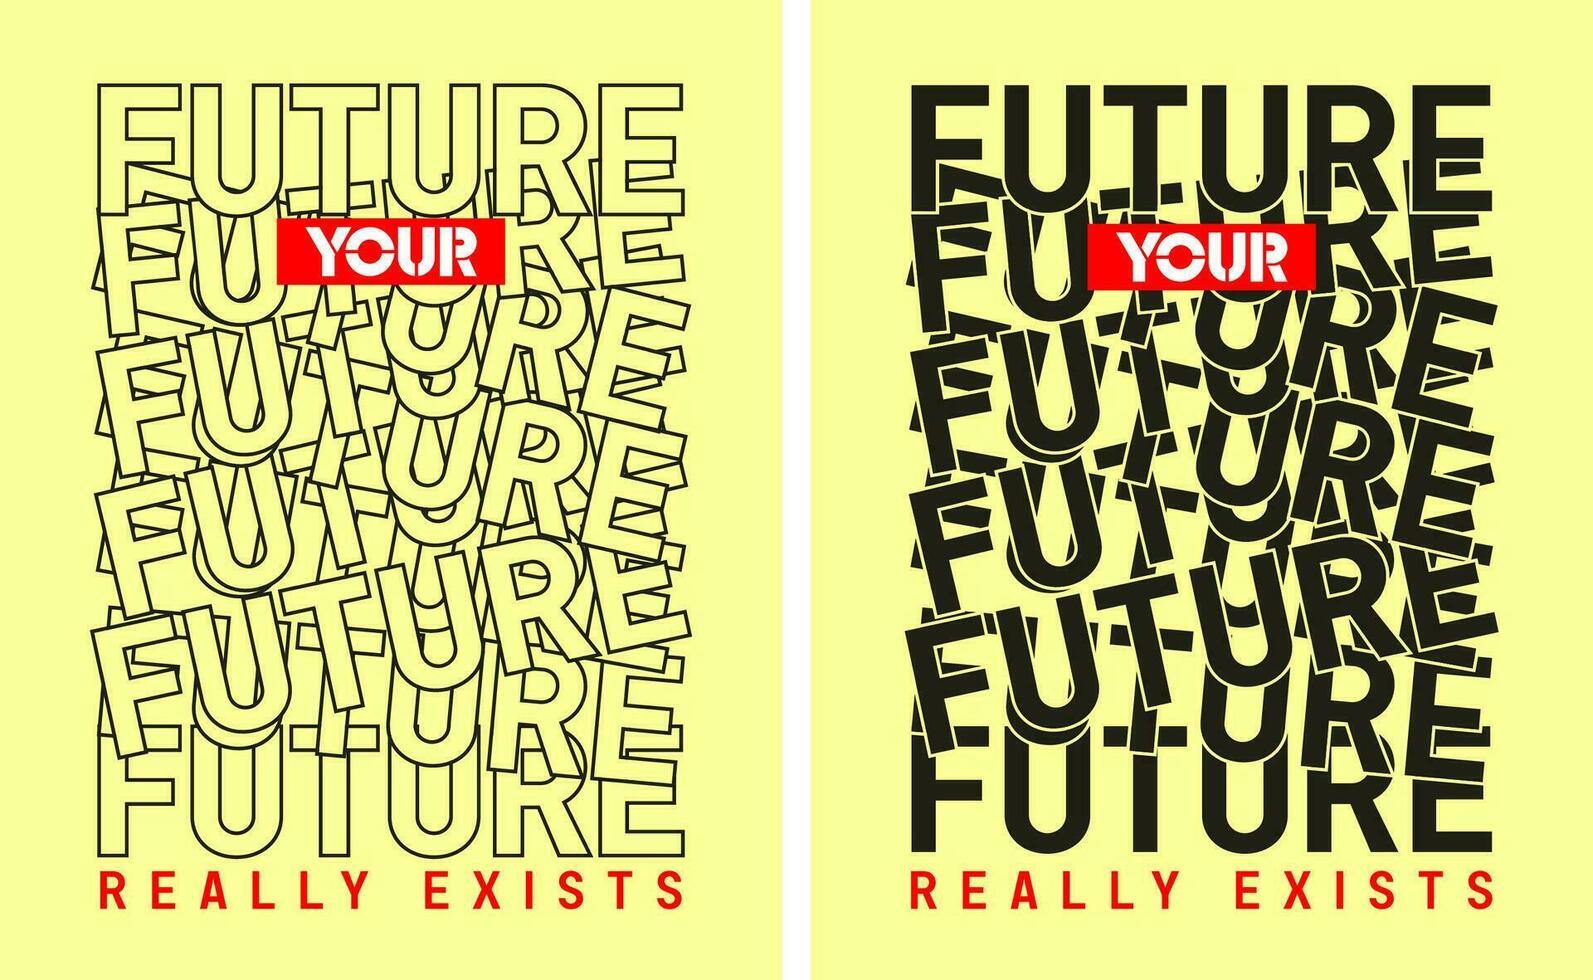 Your future t shirt pattern overlap type, motivational quote, lettering concept, banner, poster, etc. vector